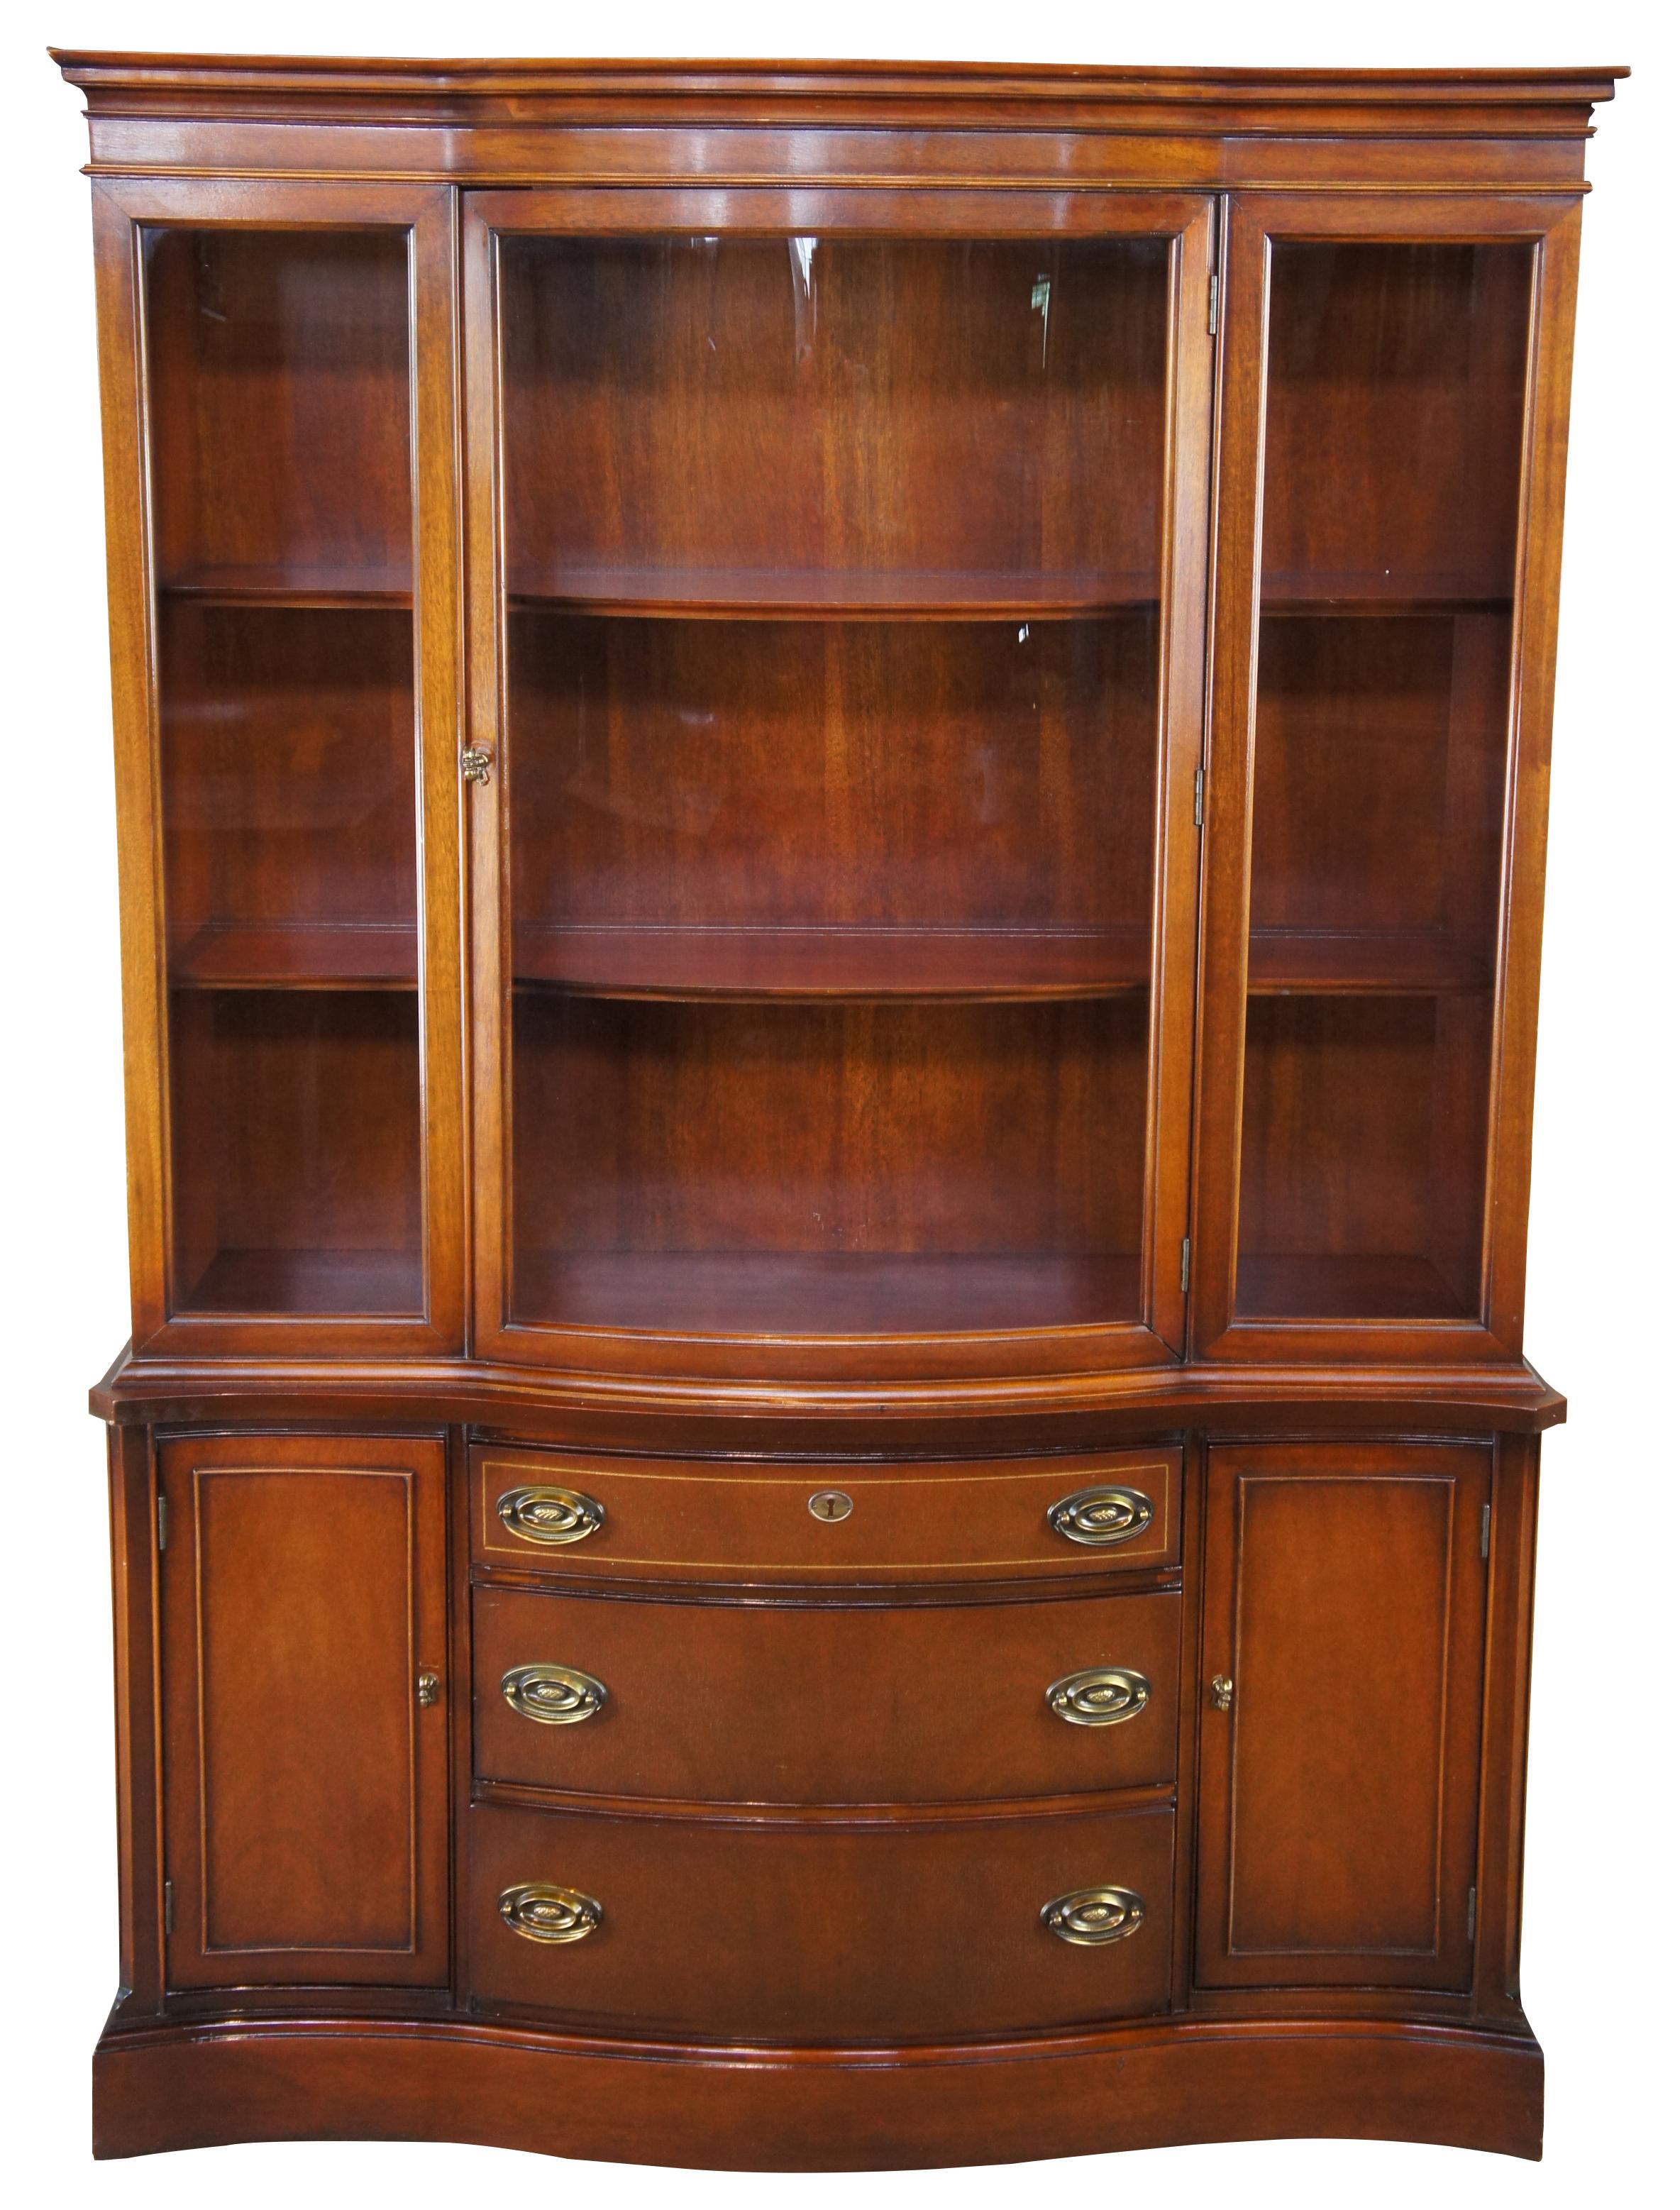 Vintage mid-century bow front china cabinet, made by Bassett Furniture in the 1950s as part of their Monticello collection. Featuring richly-hued mahogany and a curved glass door which matches the curved drawer fronts. This piece was constructed